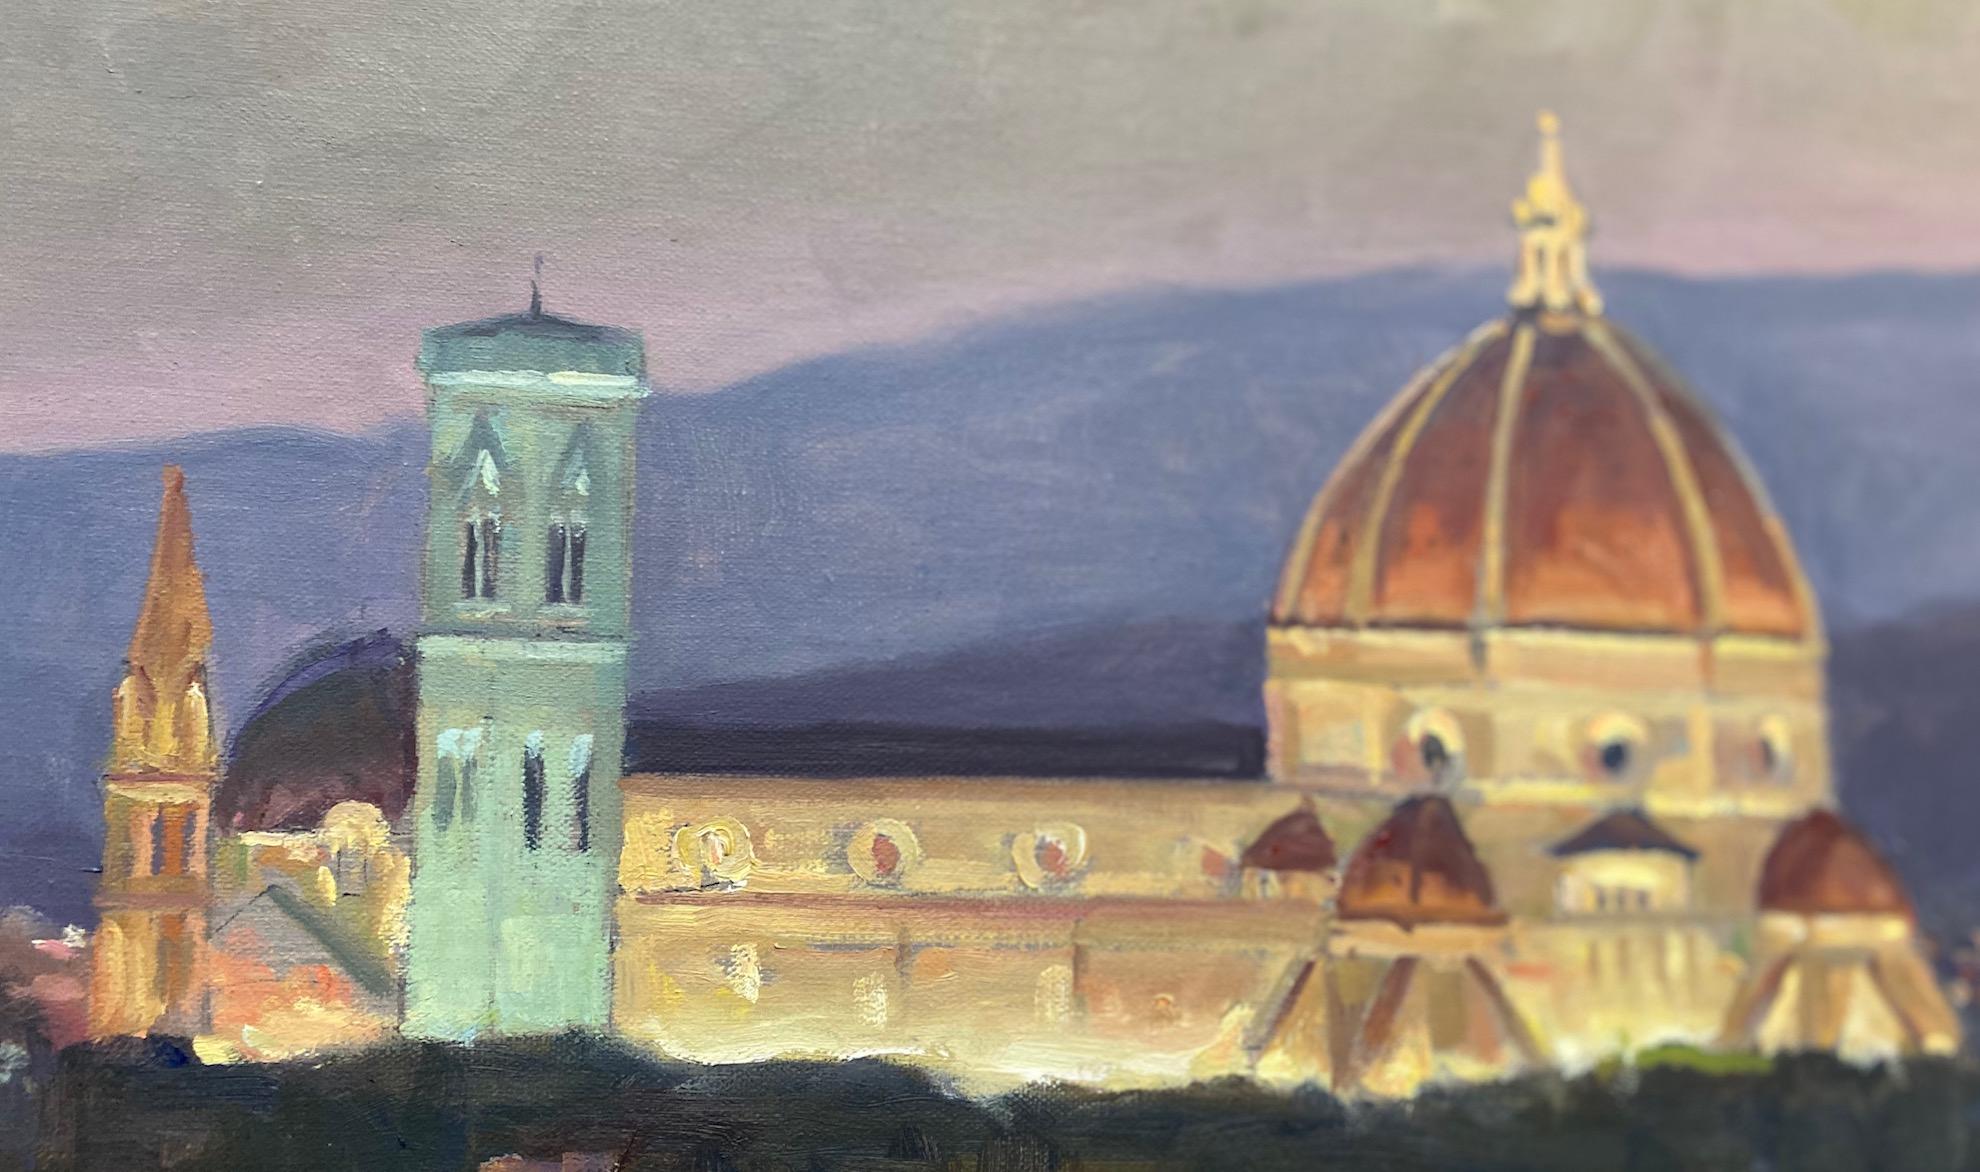 Florence, Italy, still one of the great art centers of Europe, glows at sunset in this impressionist Italian landscape.  Painted en plein air,  artist Leonard Mizerek at once creates a stillness that's blanketed with a sense of wonder.  As Florence